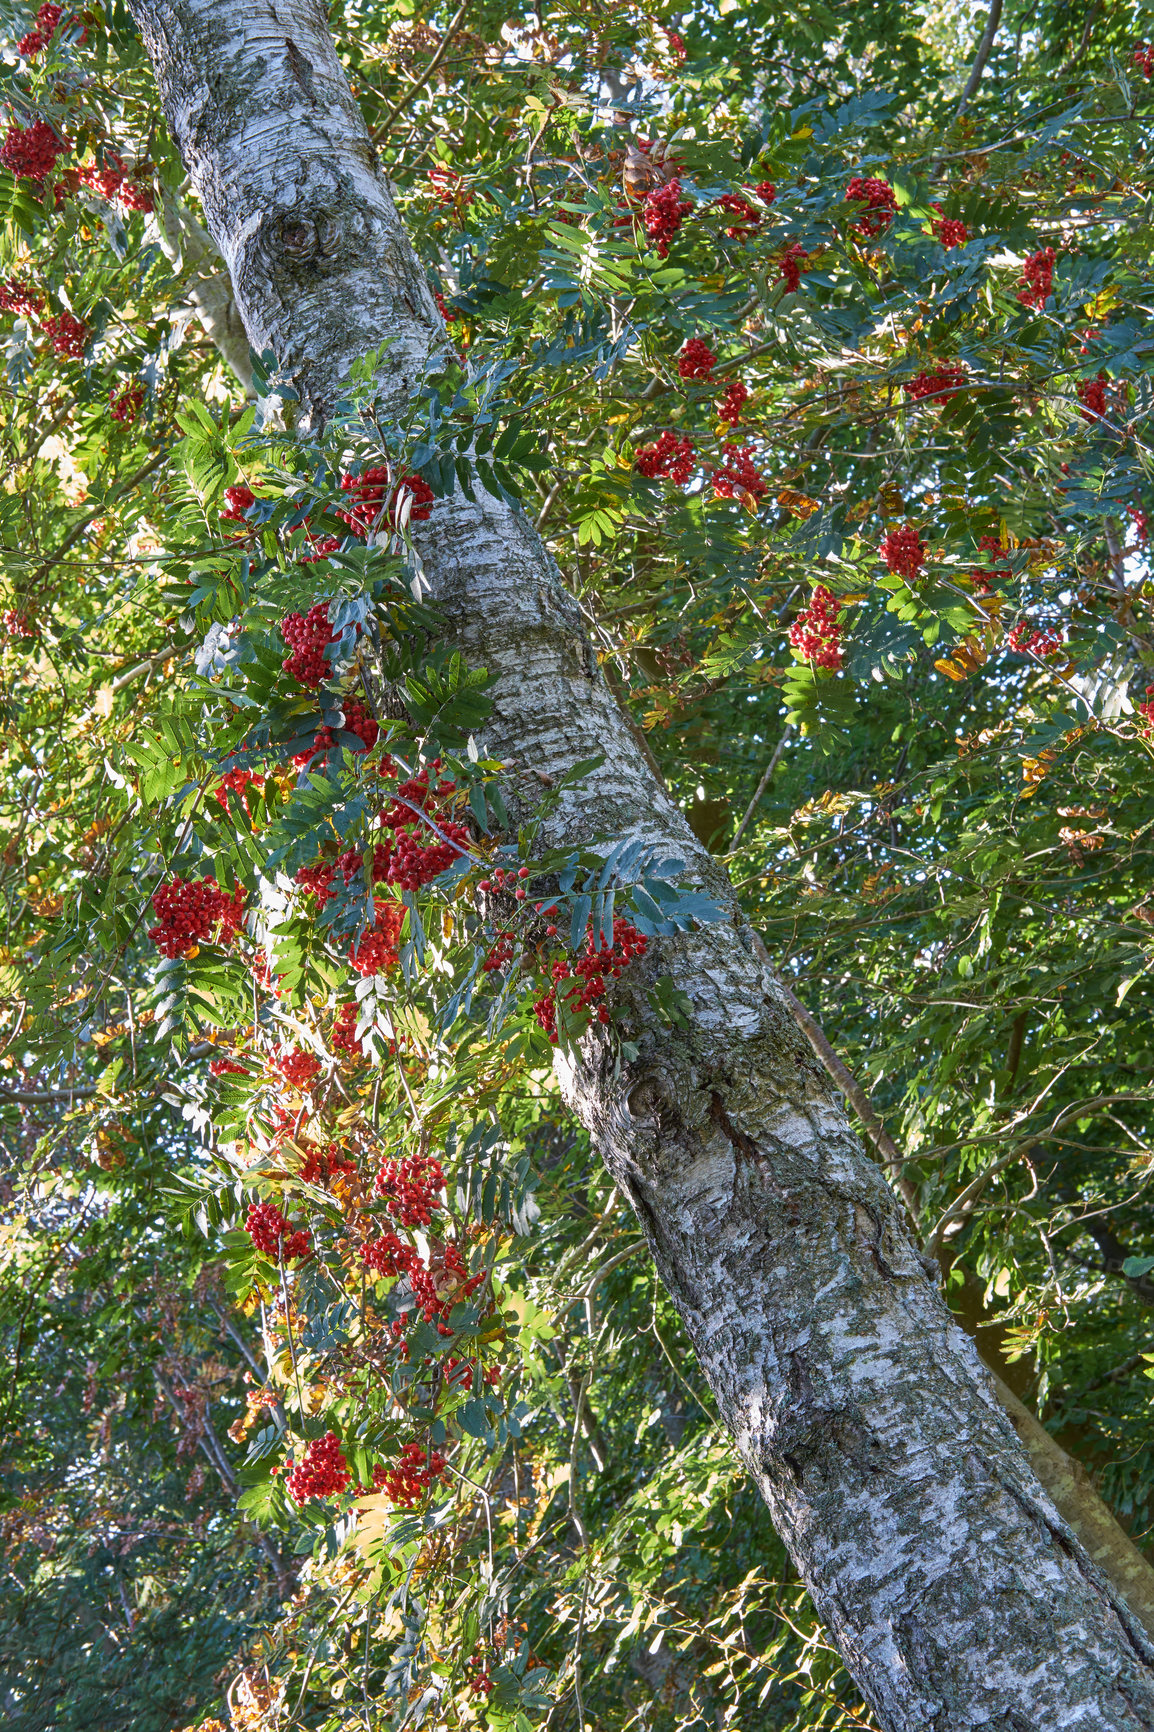 Buy stock photo Red rowan berries growing on a tall tree in the woods from below. Mountain ashes growing in a thick dense forest in the Himalayas. Natural habitat or ecosystem for a thriving plants and vegetation